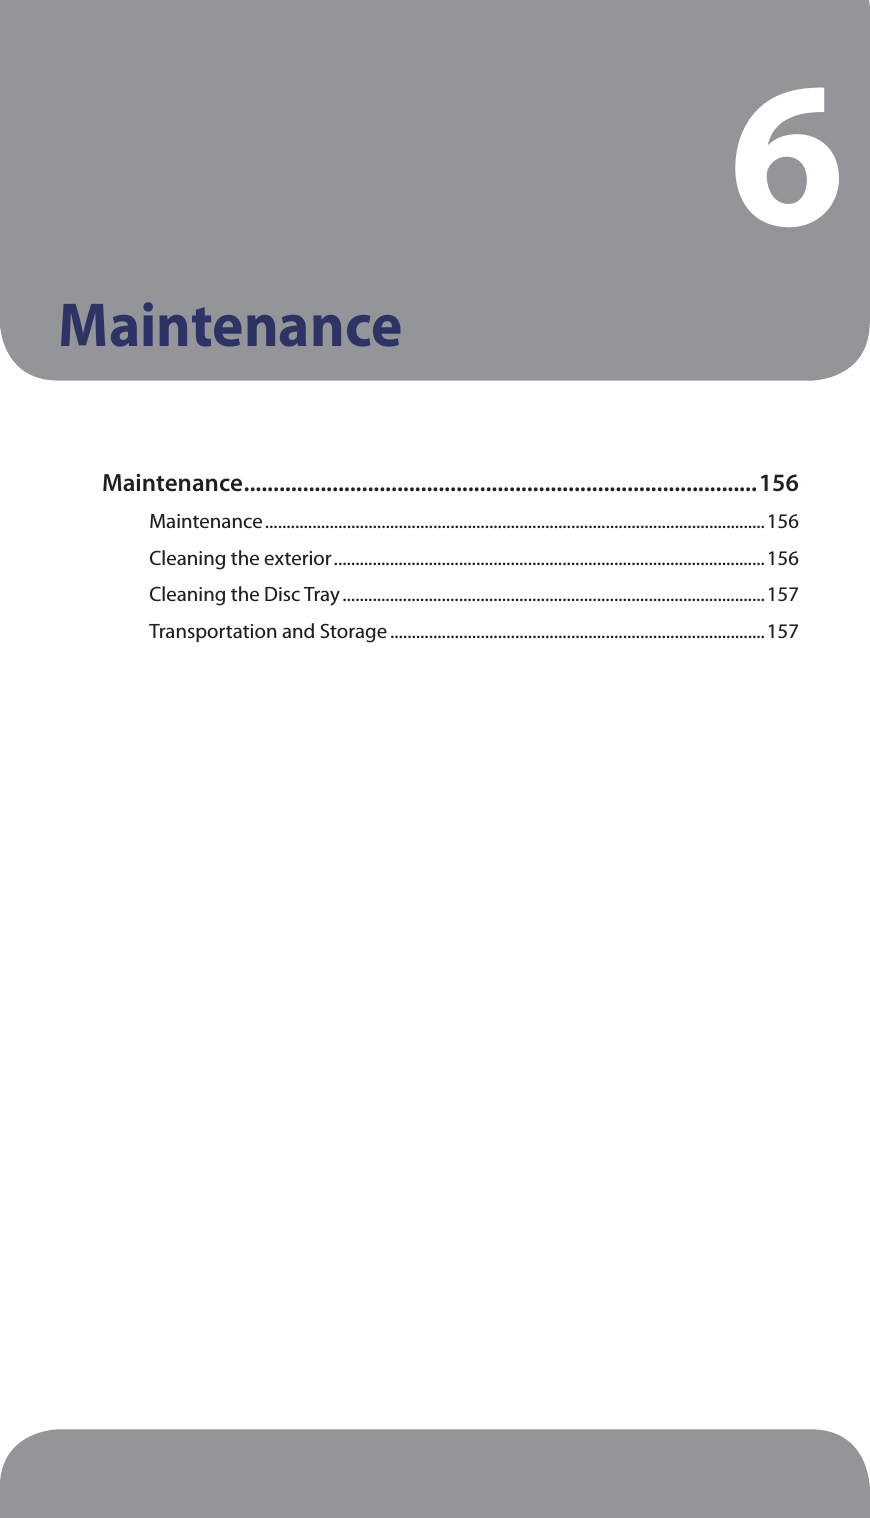 6MaintenanceMaintenance .......................................................................................156Maintenance ....................................................................................................................156Cleaning the exterior ....................................................................................................156Cleaning the Disc Tray ..................................................................................................157Transportation and Storage .......................................................................................157